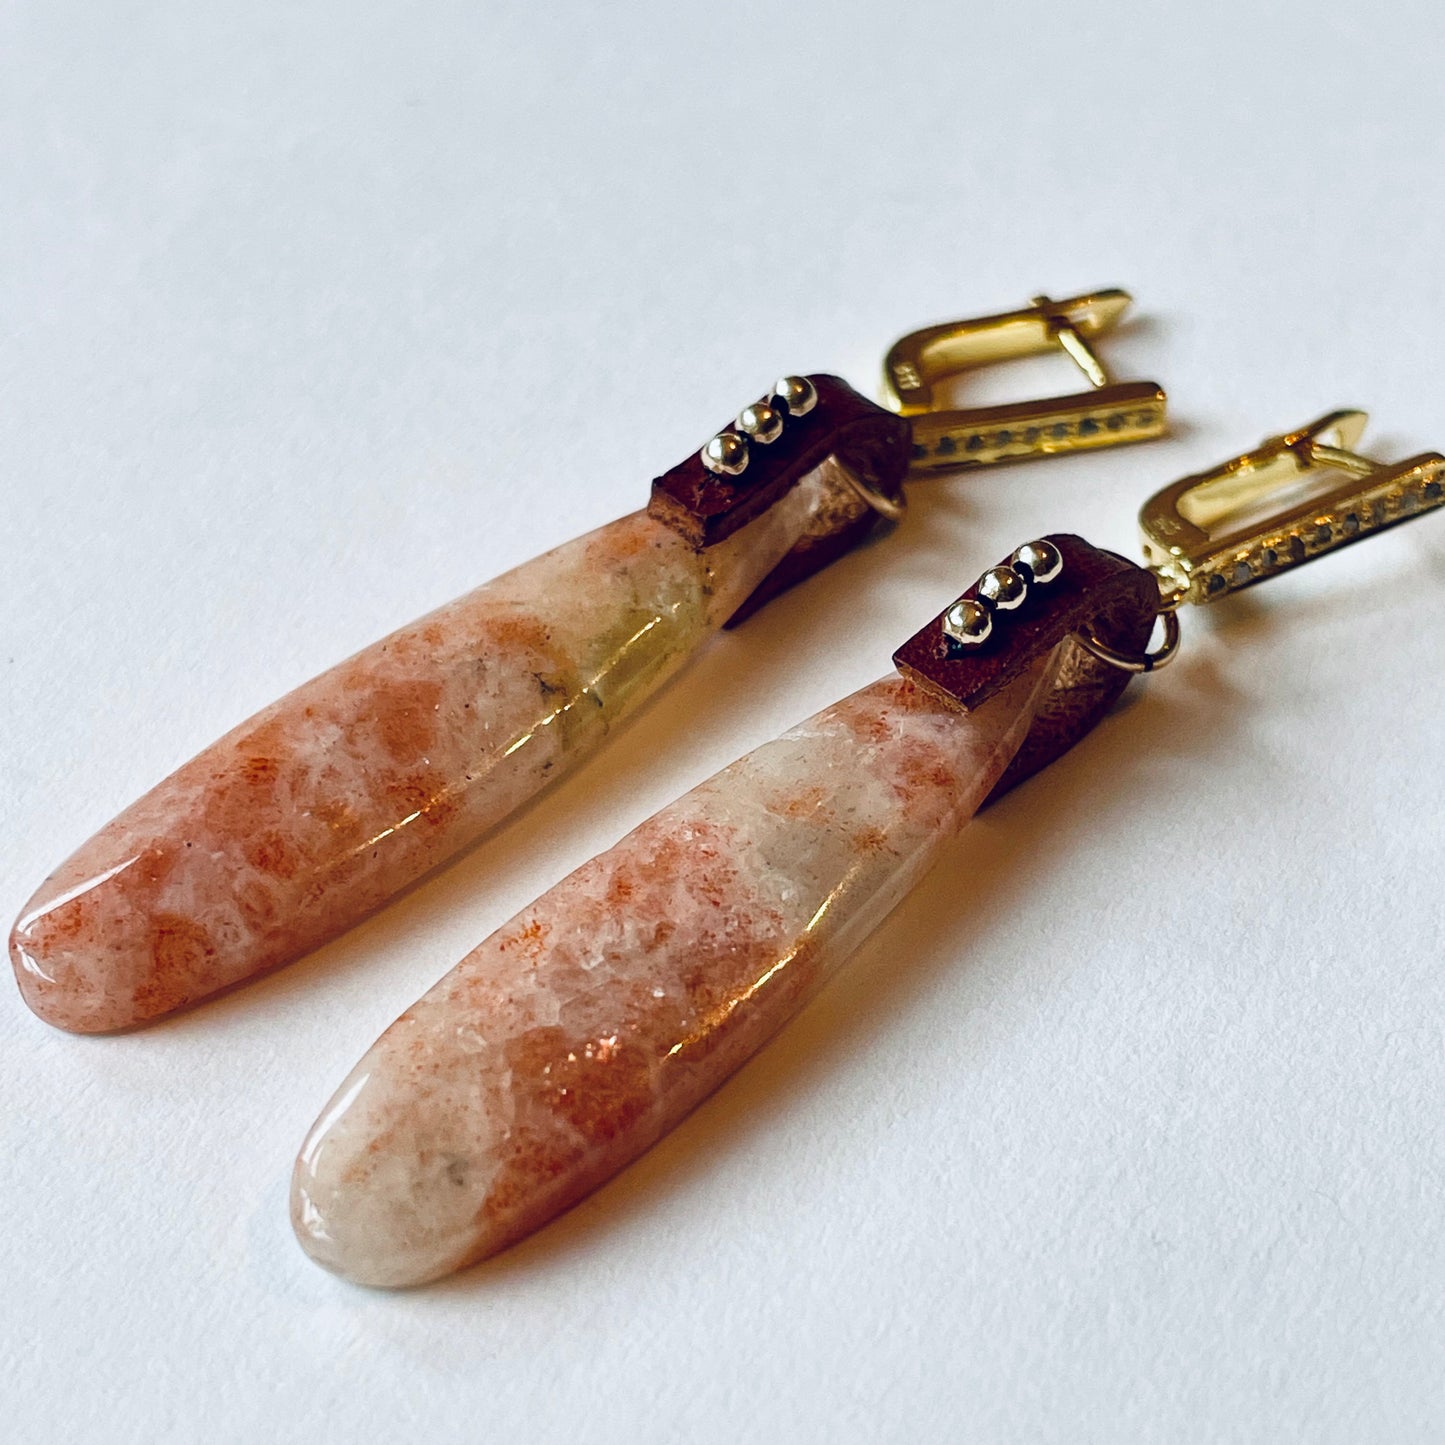 Endless Summer Sunstone Teardrop Earrings in Gold Vermeil with Pave-Set Diamonds OOAK (one of a kind)